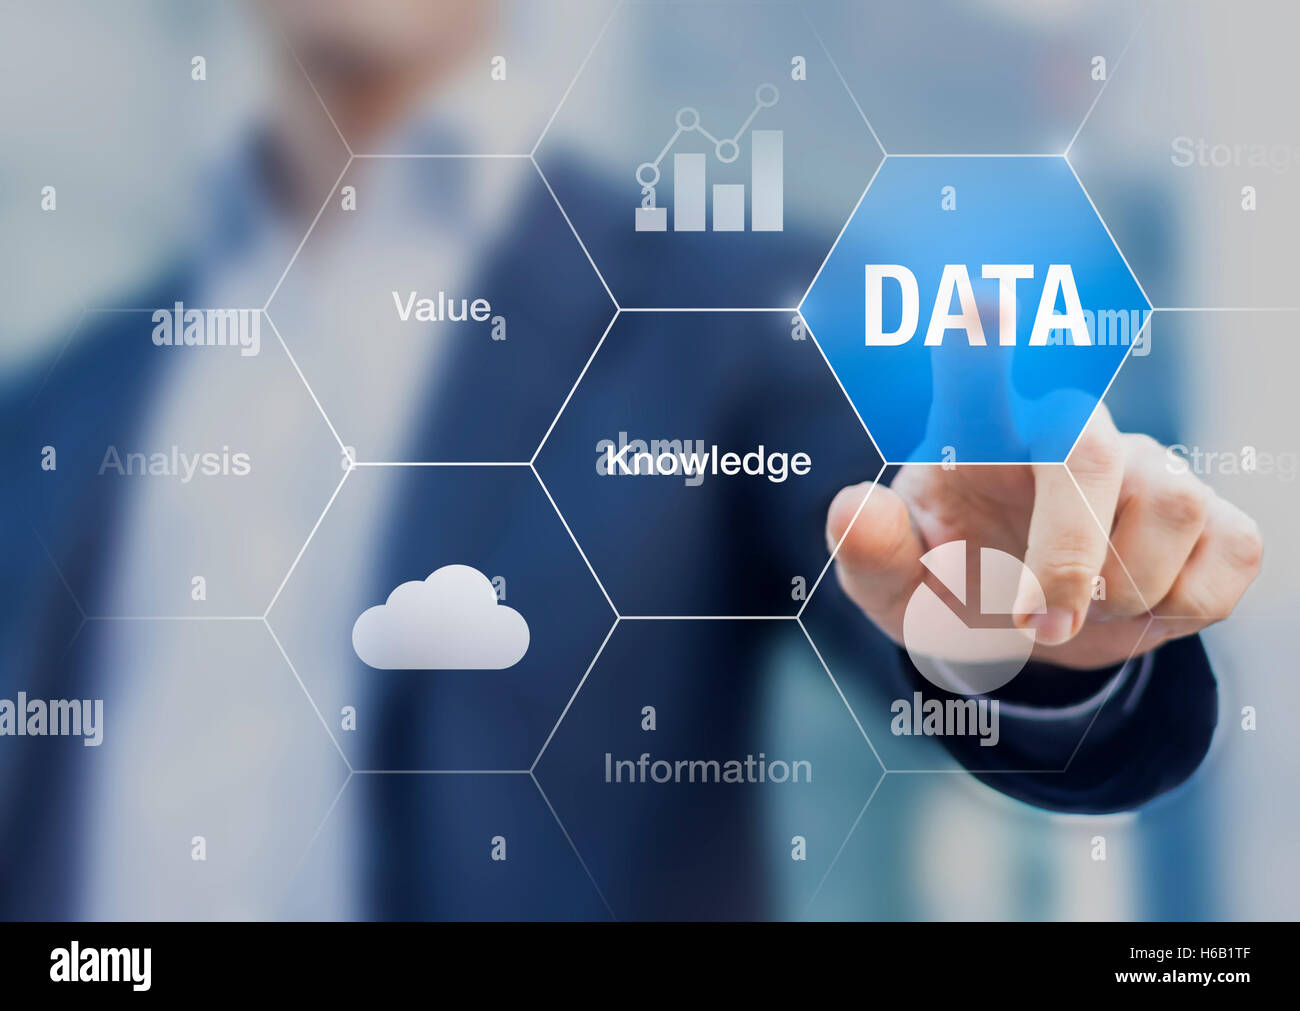 Concept about the value of data for information and knowledge Stock Photo